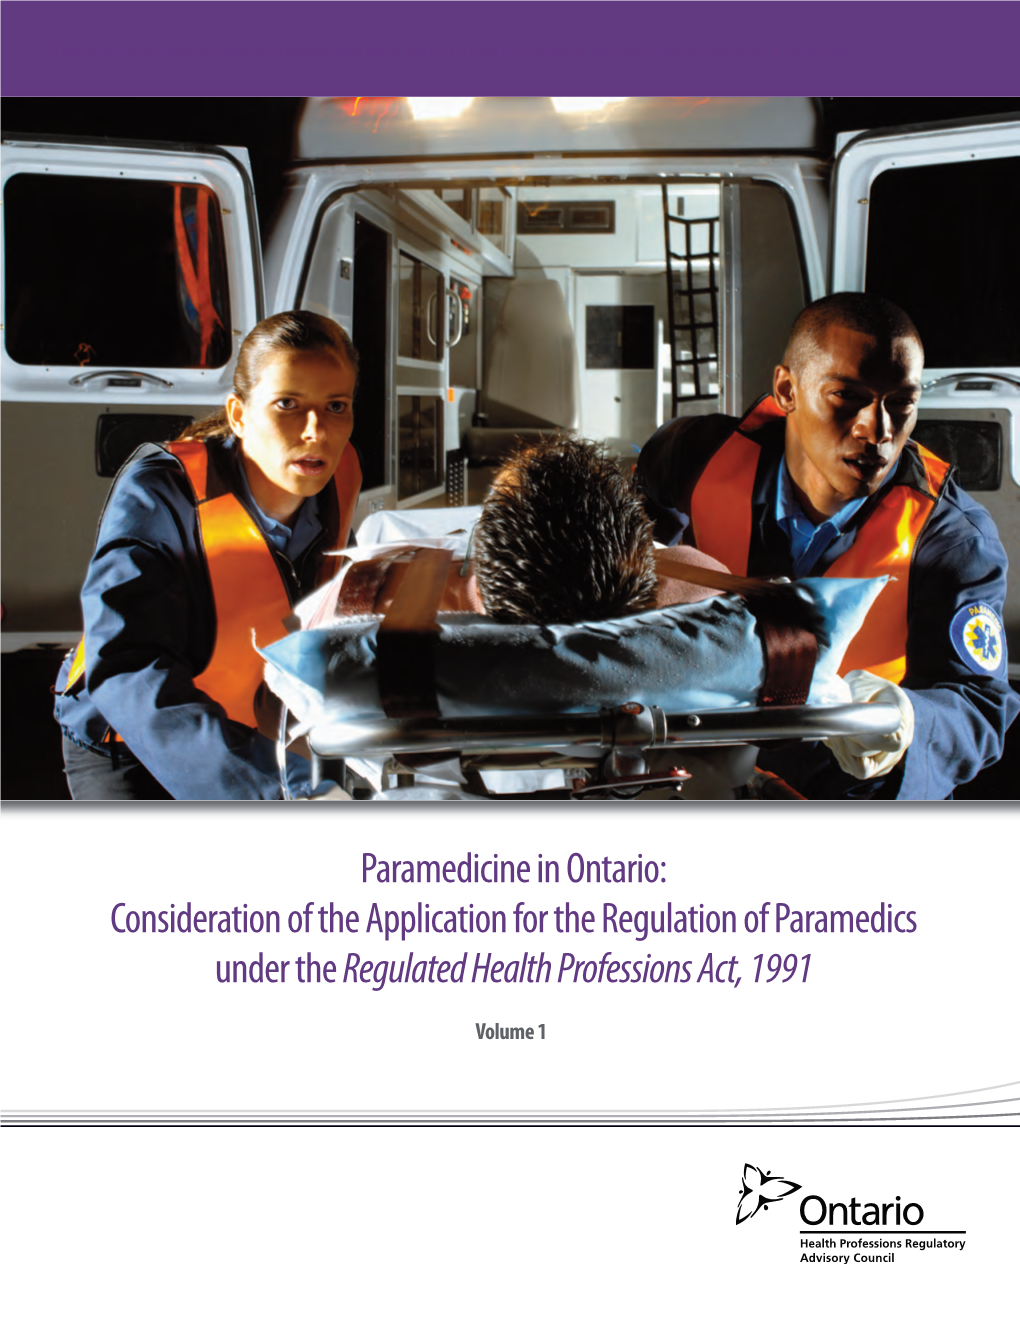 Consideration of the Application for the Regulation of Paramedics Under the Regulated Health Professions Act, 1991